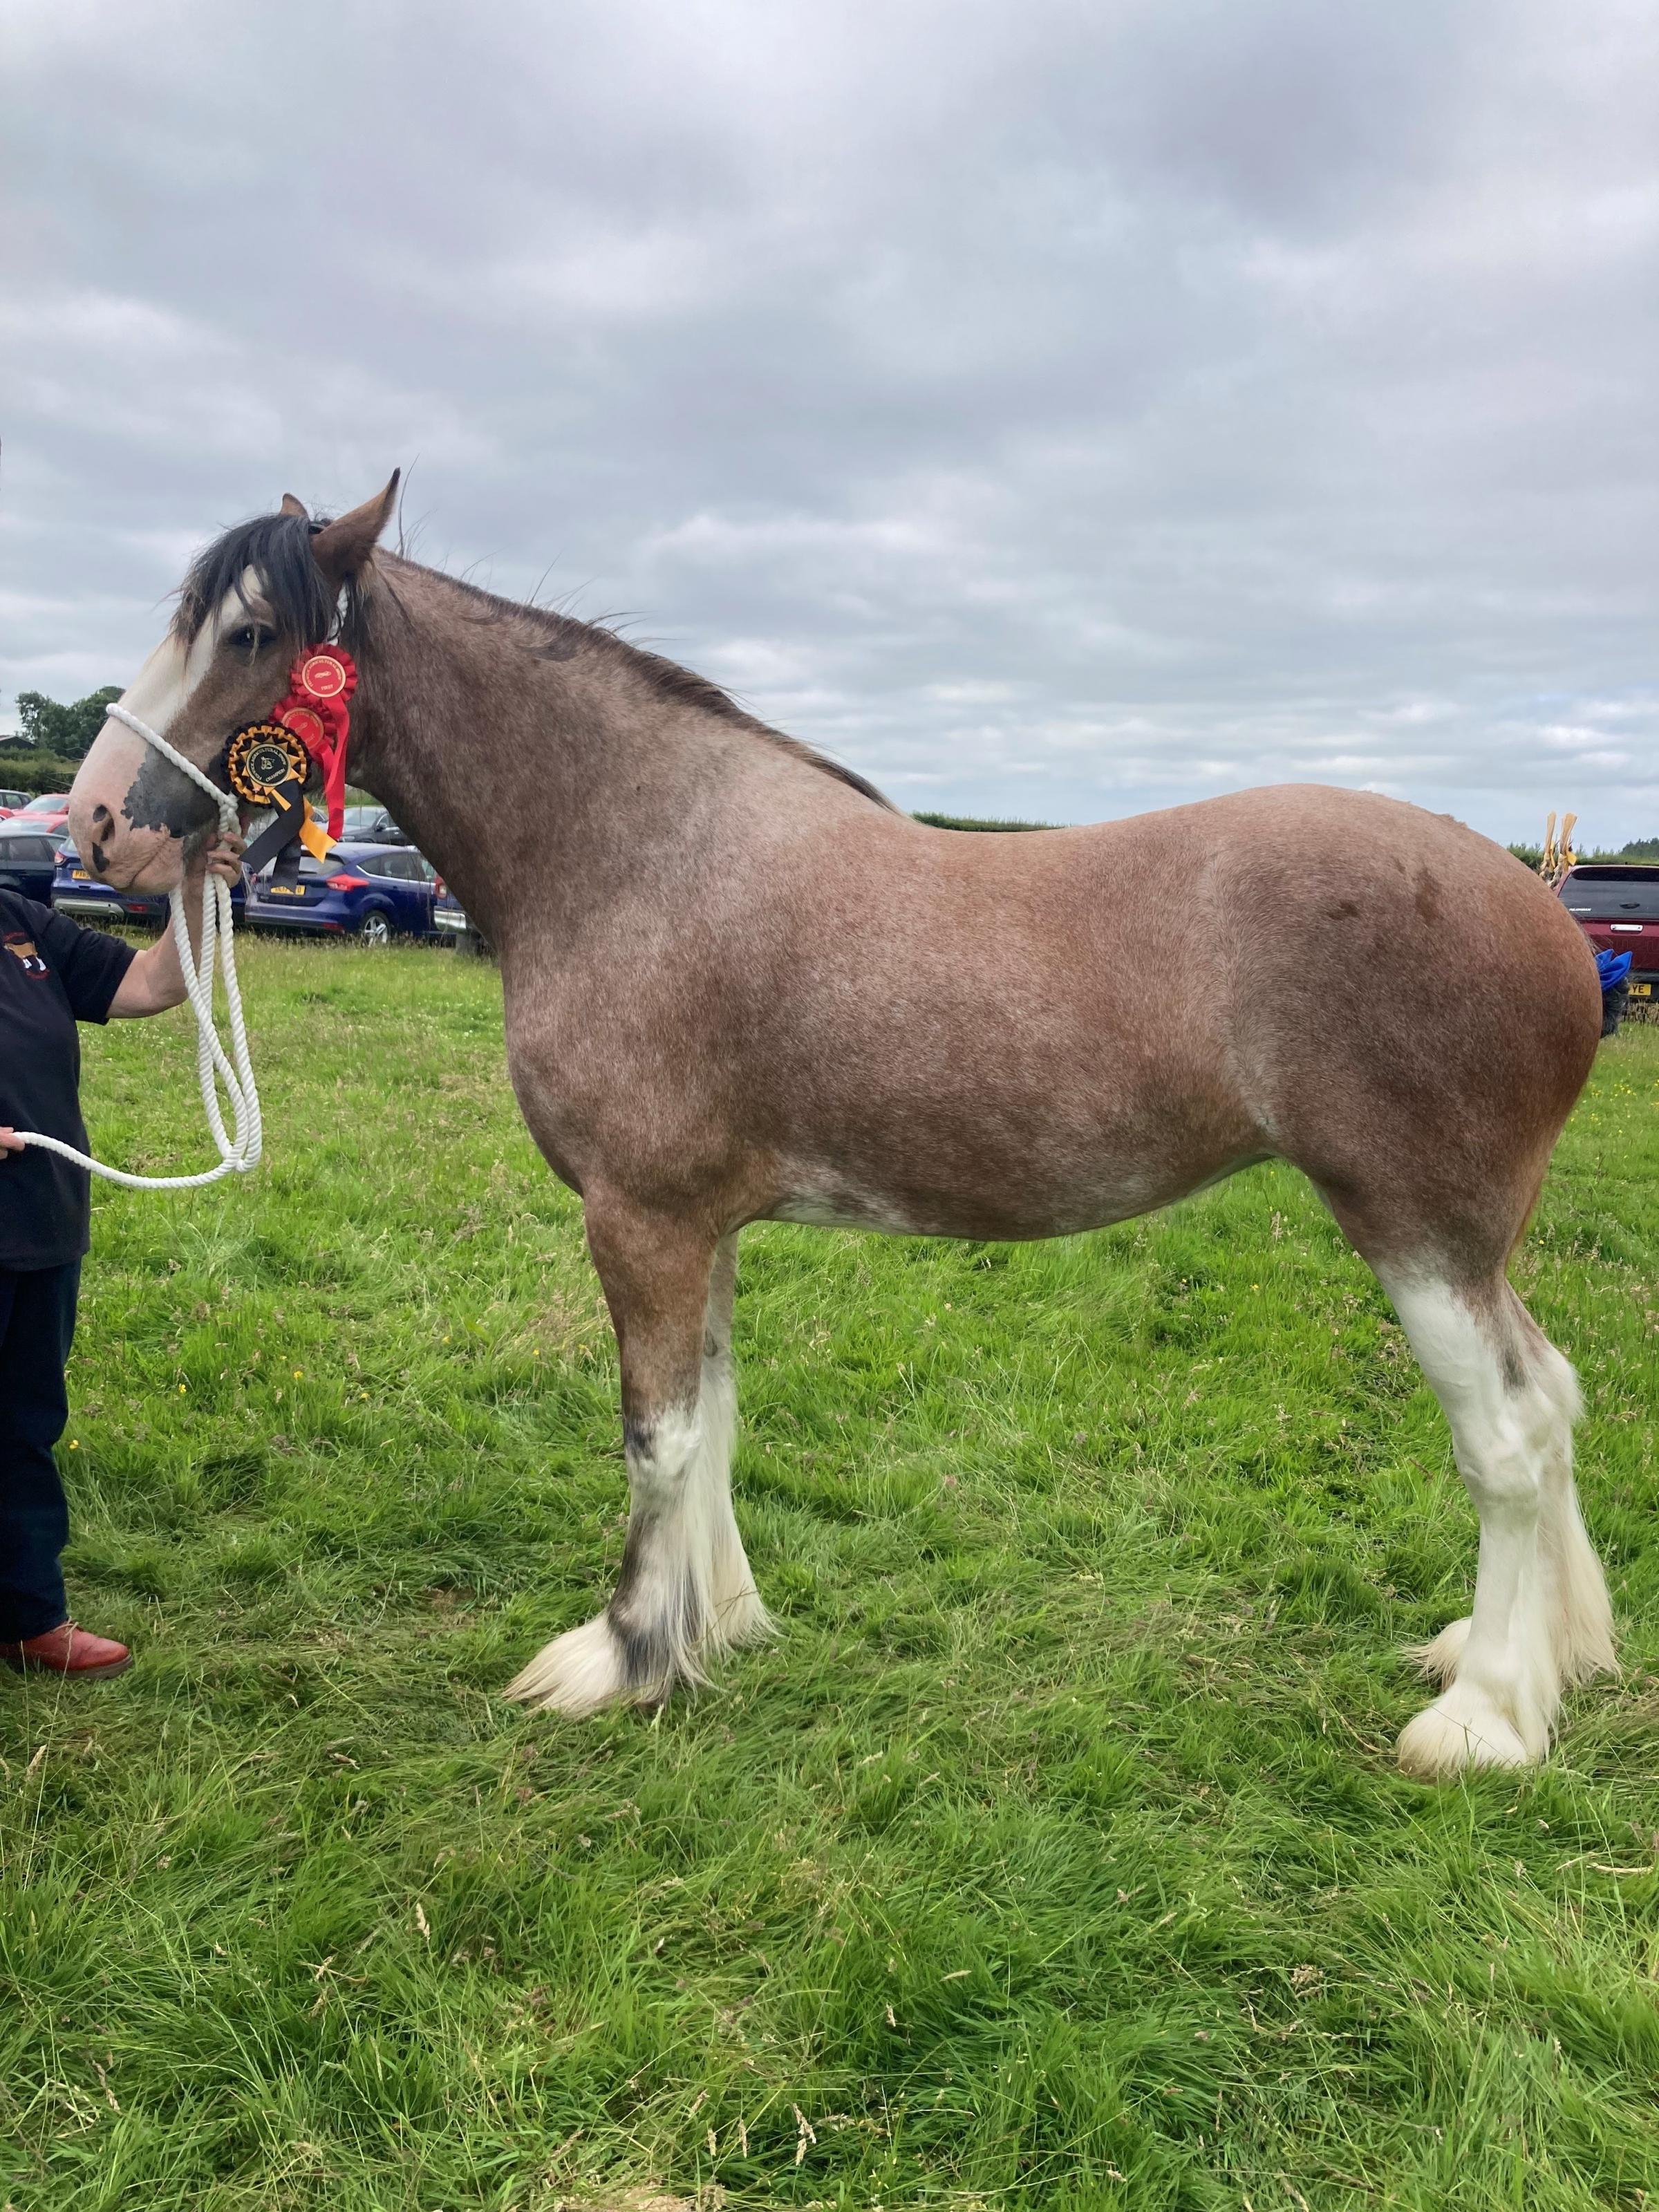 Clydesdale champion came from A Steel 